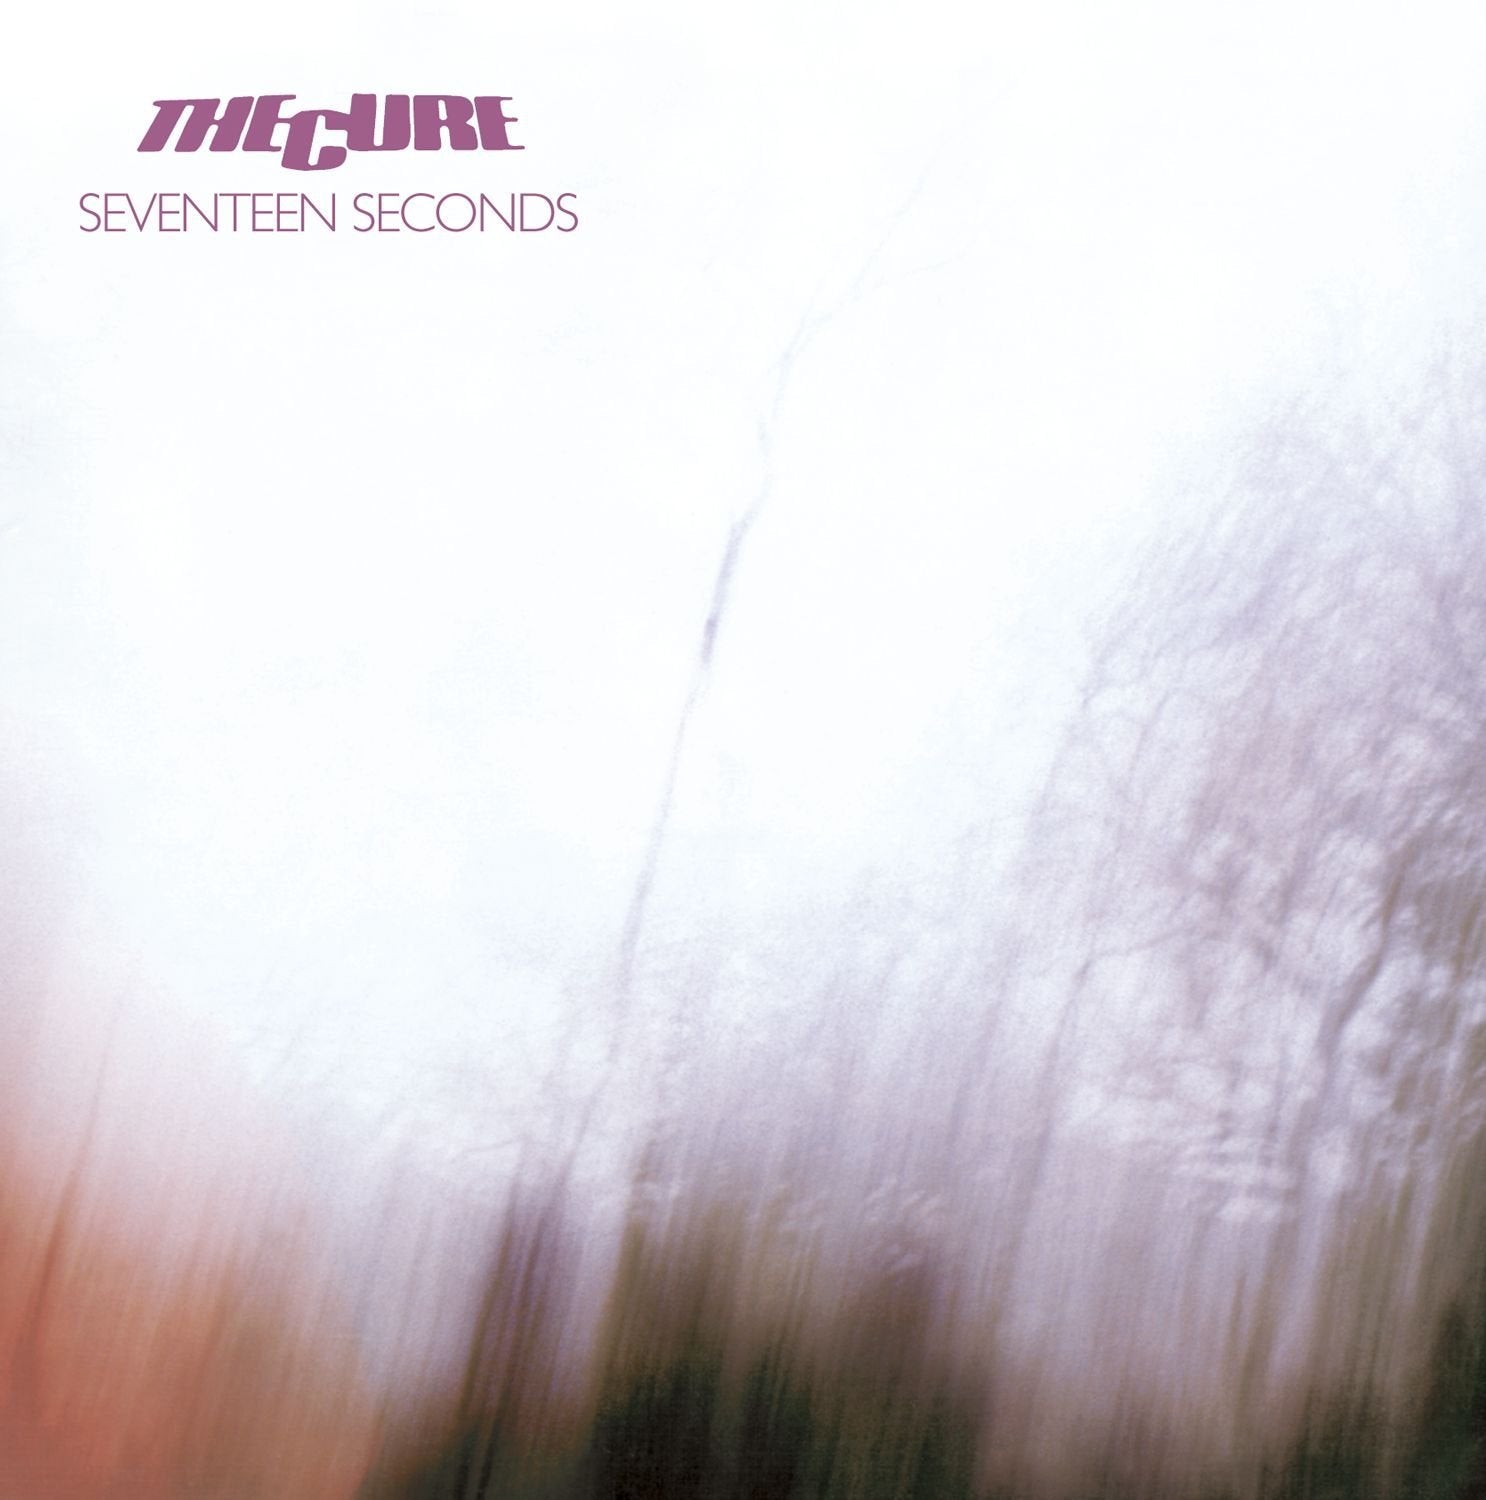 CD - THE CURE - SEVENTEEN SECONDS